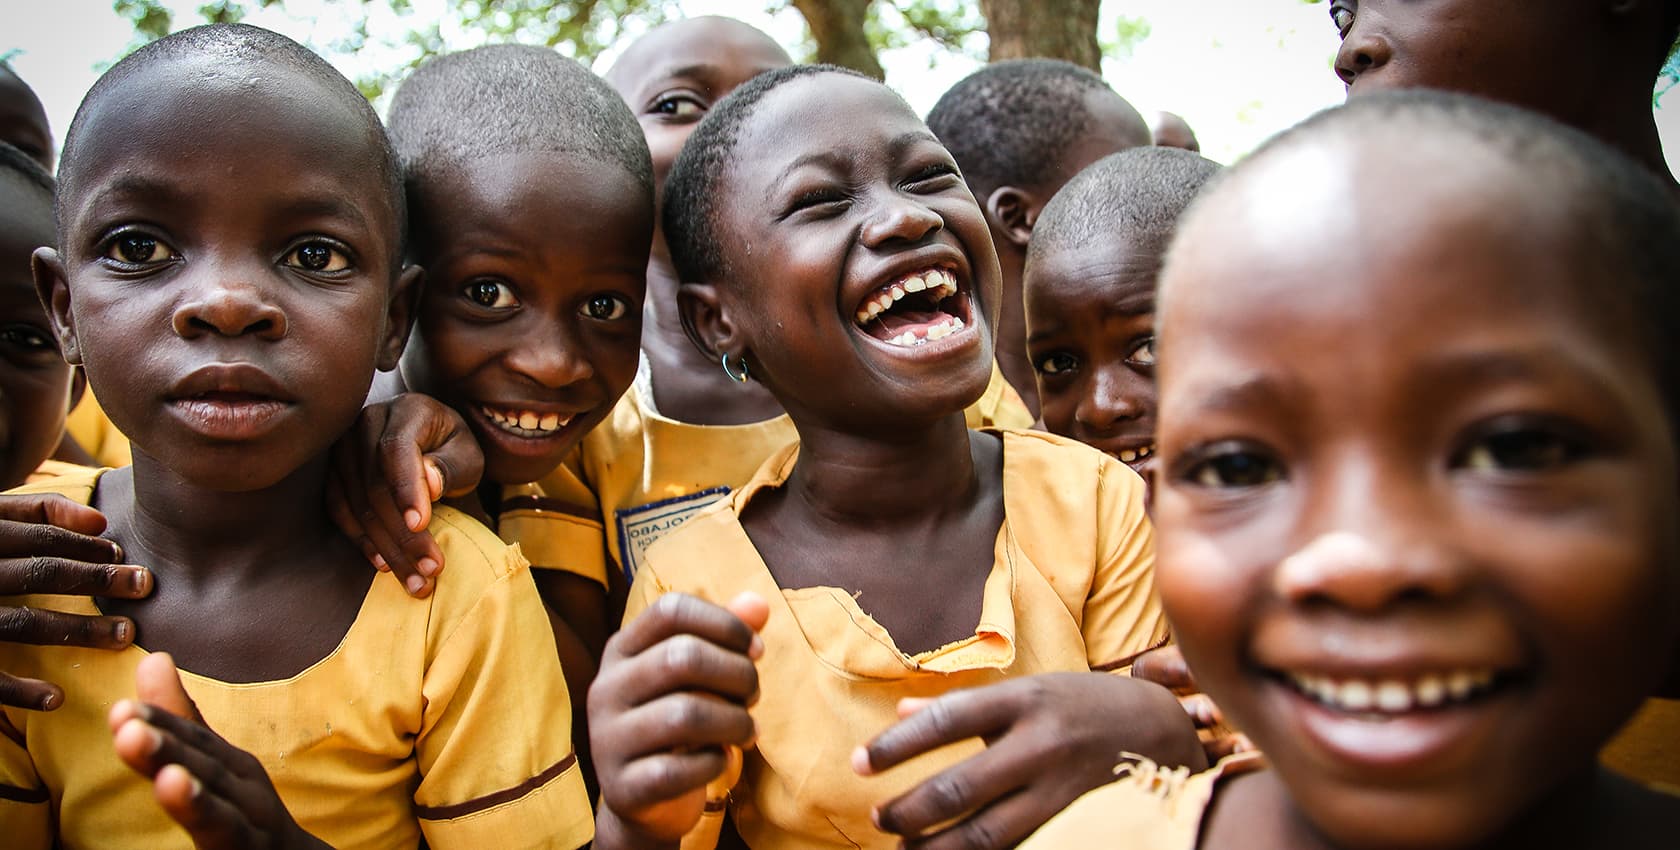 A group of children in yellow, school uniforms smile and laugh